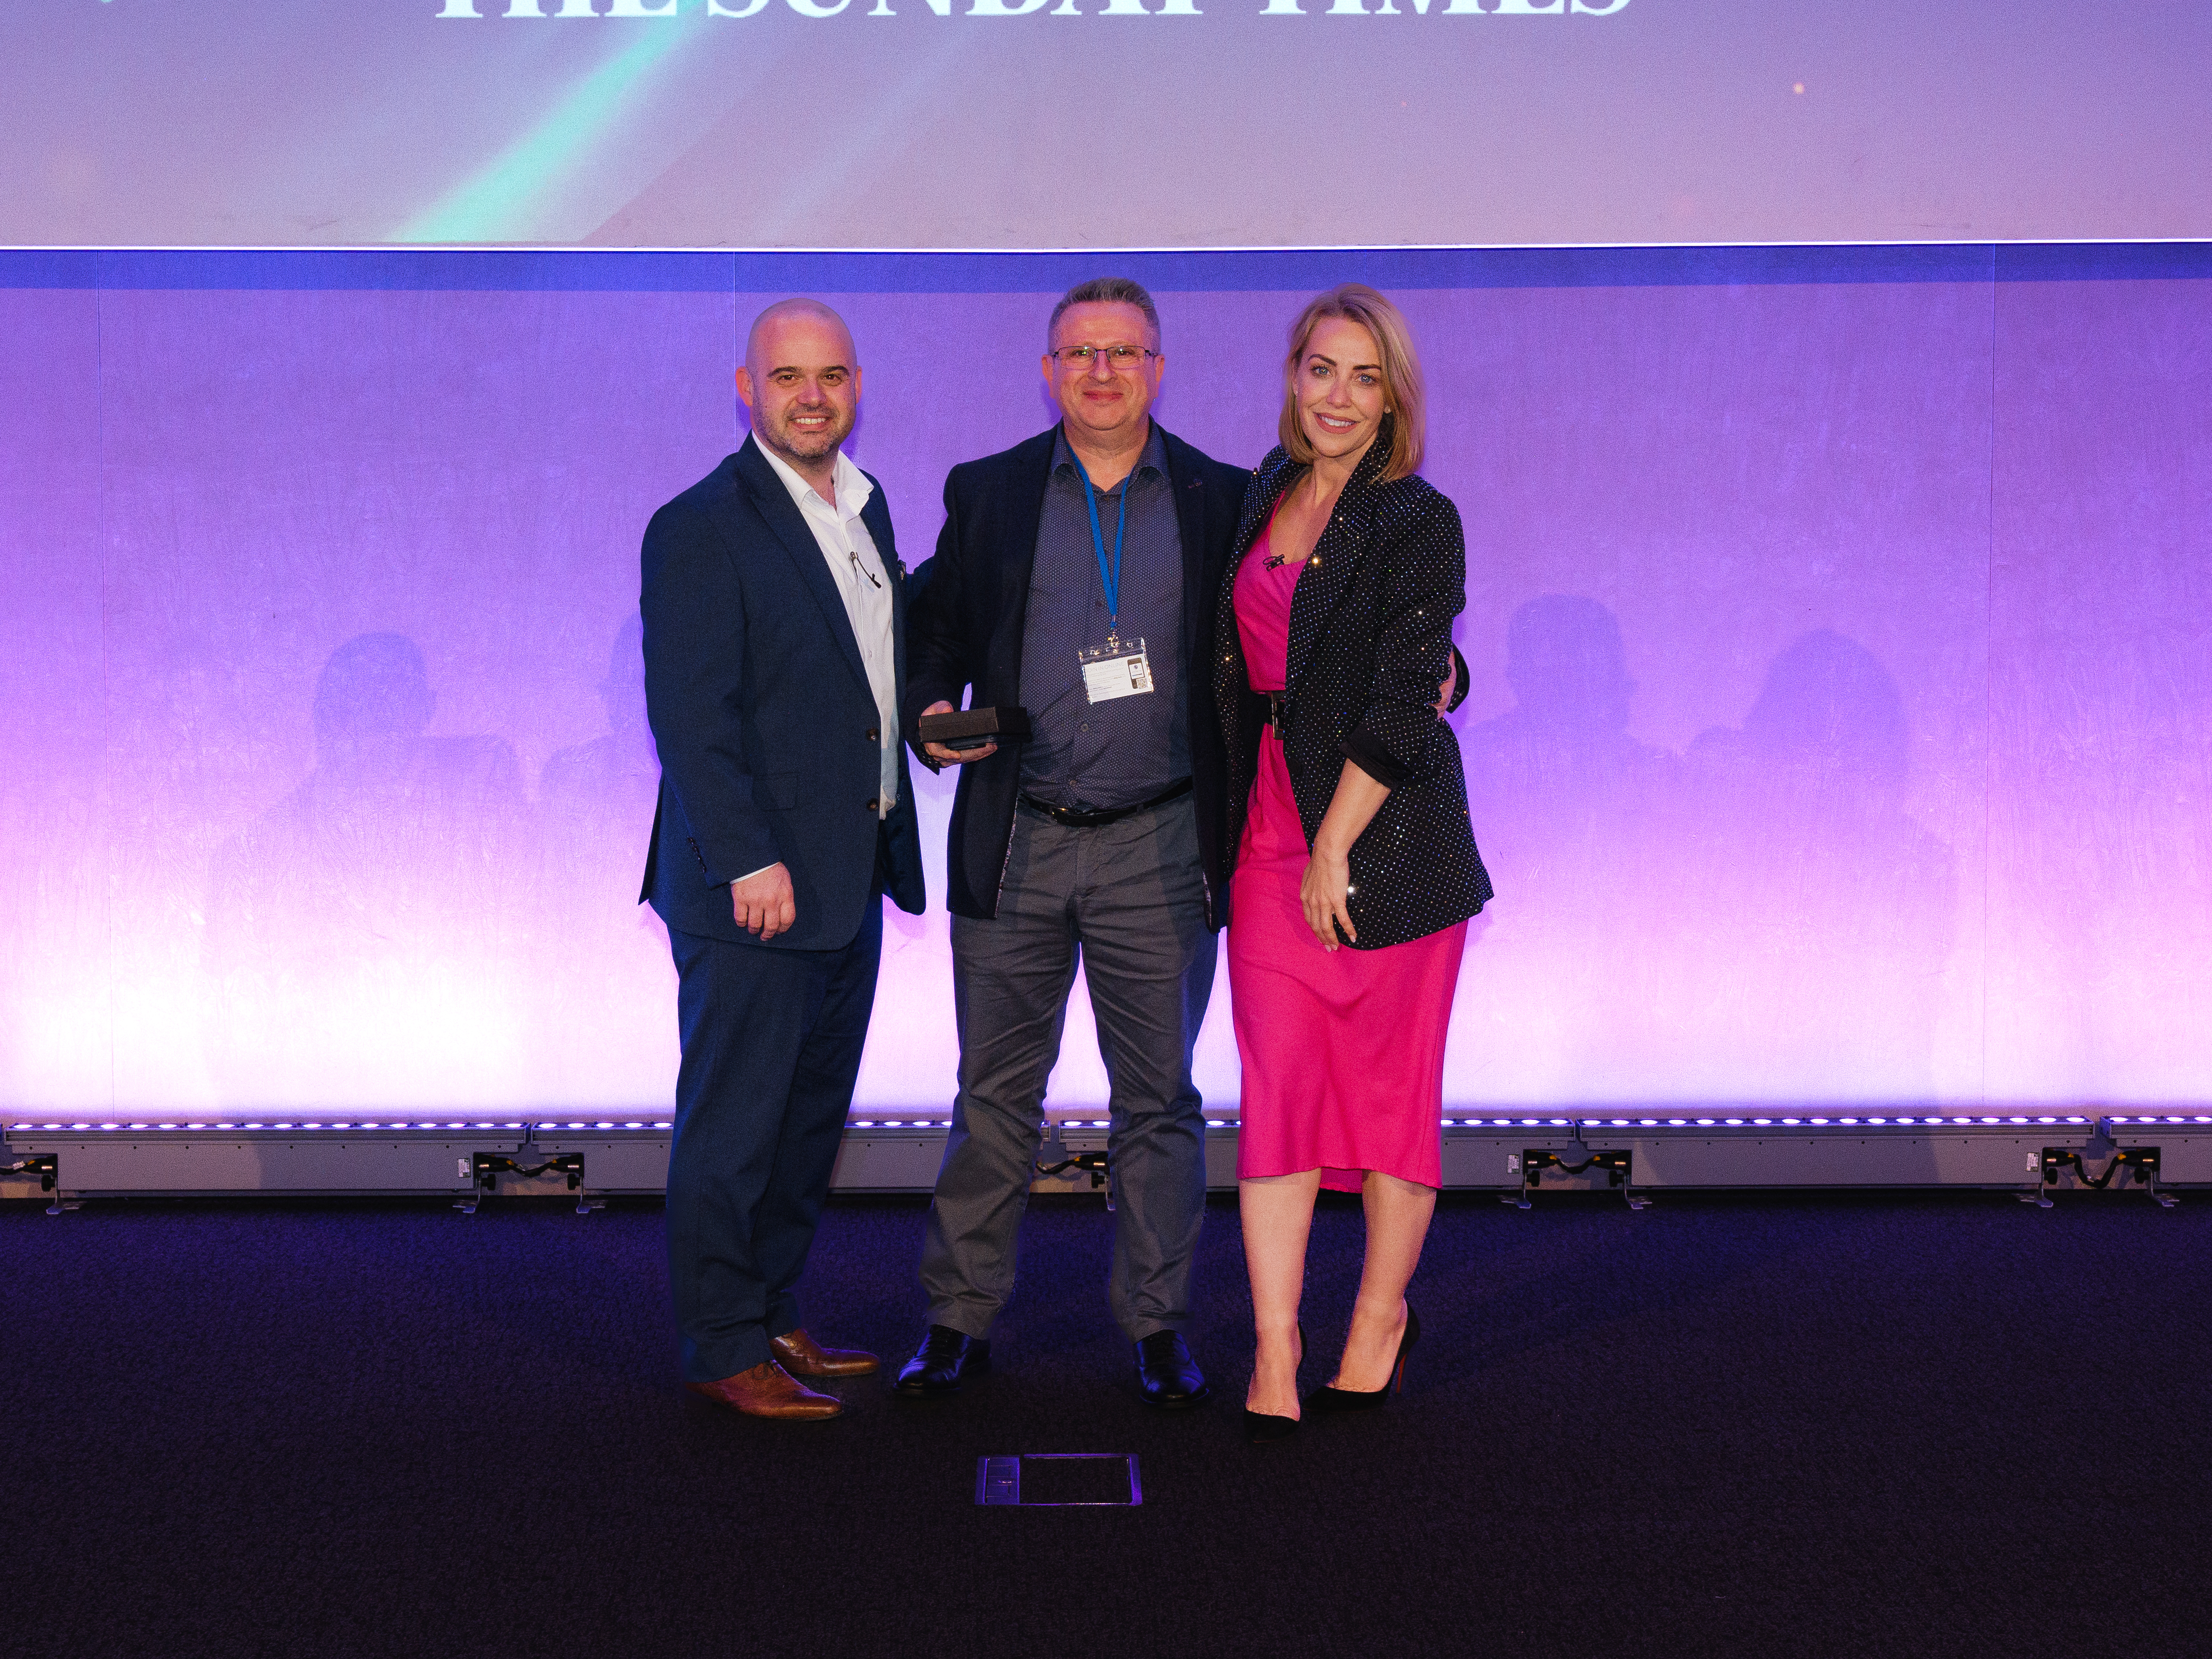 Guild of property professionals Member Rockett Home Rentals wins bronze award for lettings at national awards ceremony.